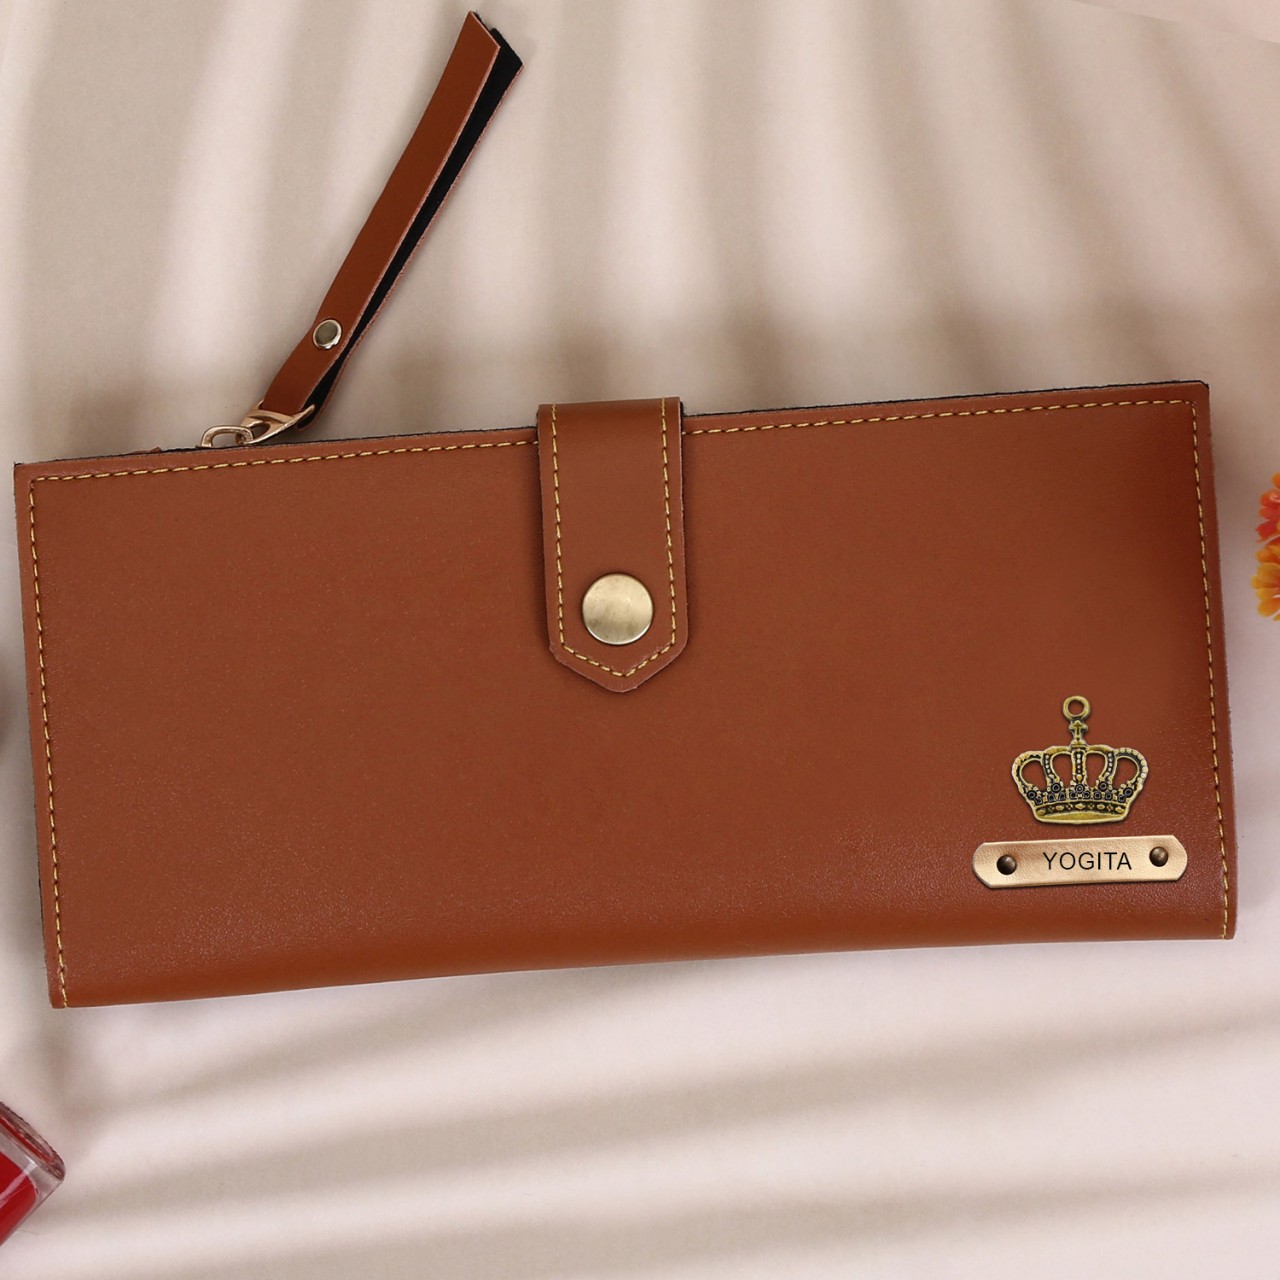 Personalized Clutch With Name & Charm - Tan